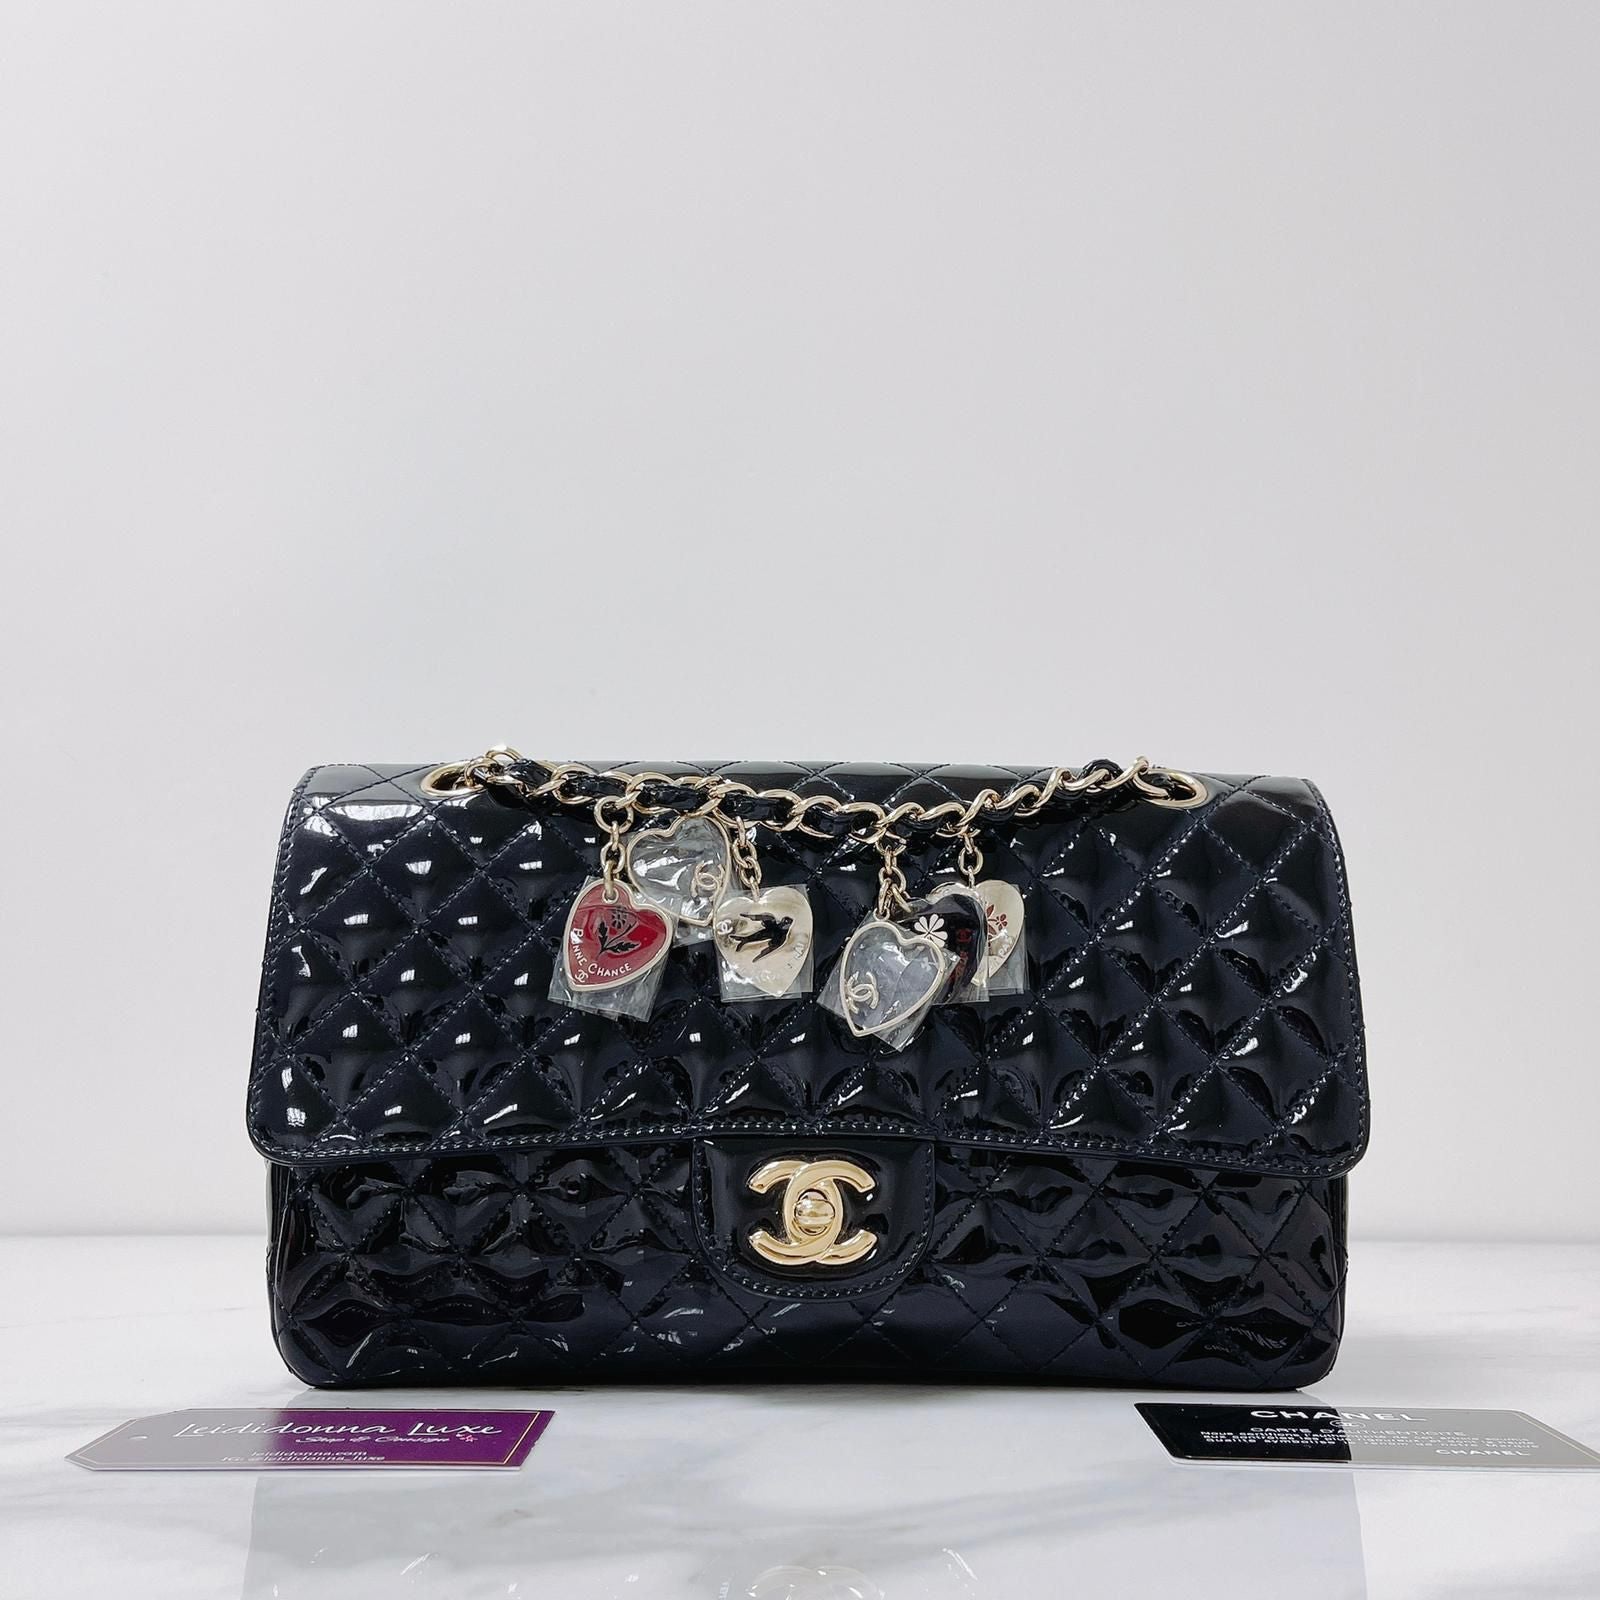 Chanel Black Quilted Leather Small Classic Single Flap Bag